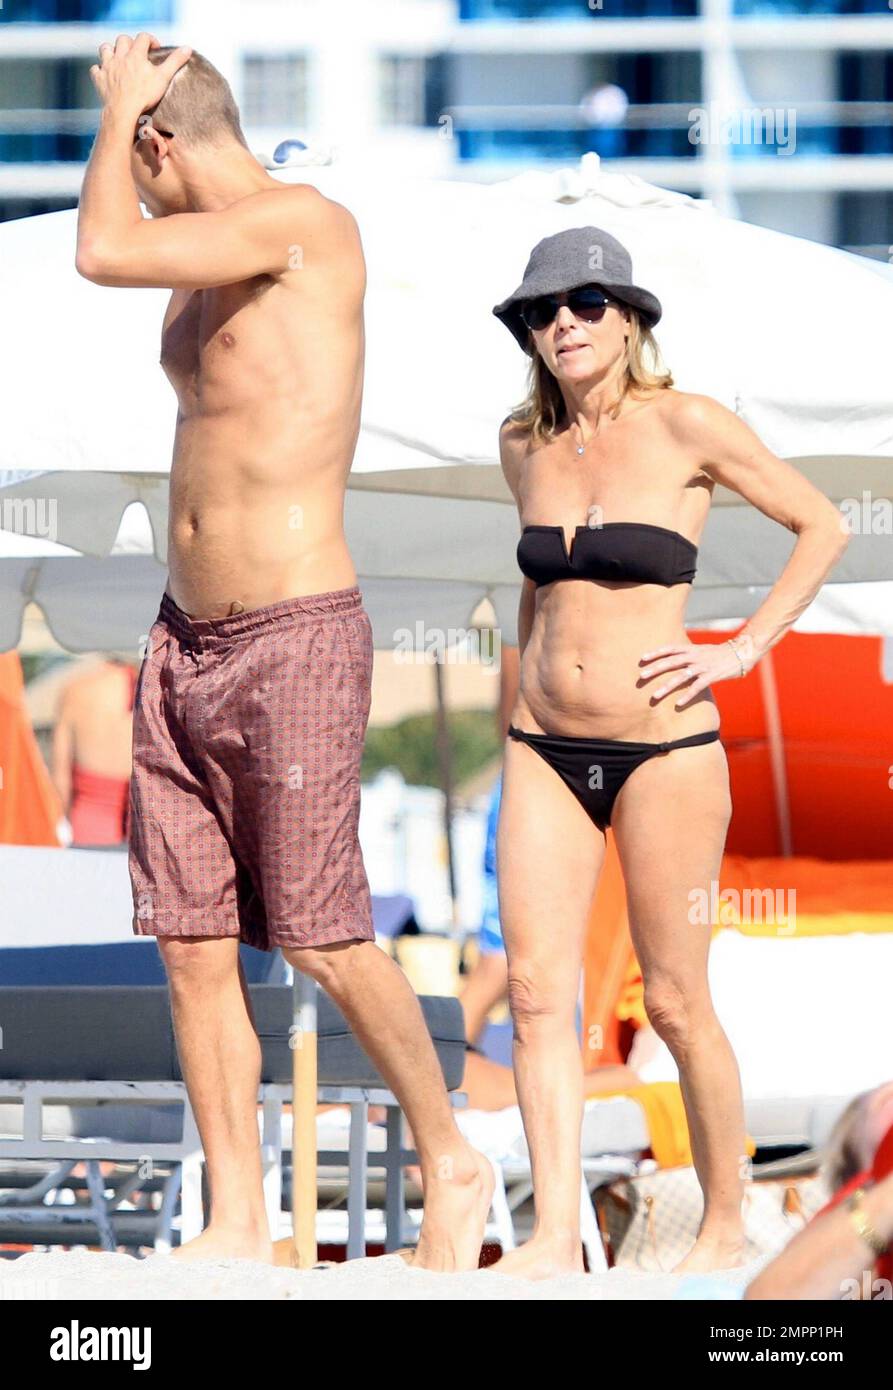 French journalist, romance writer and director of news at TF1, Claire Chazal  wears a black bikini as she relaxes on the beach during a winter holiday  with husband Arnaud Lemaire. Chazal, who